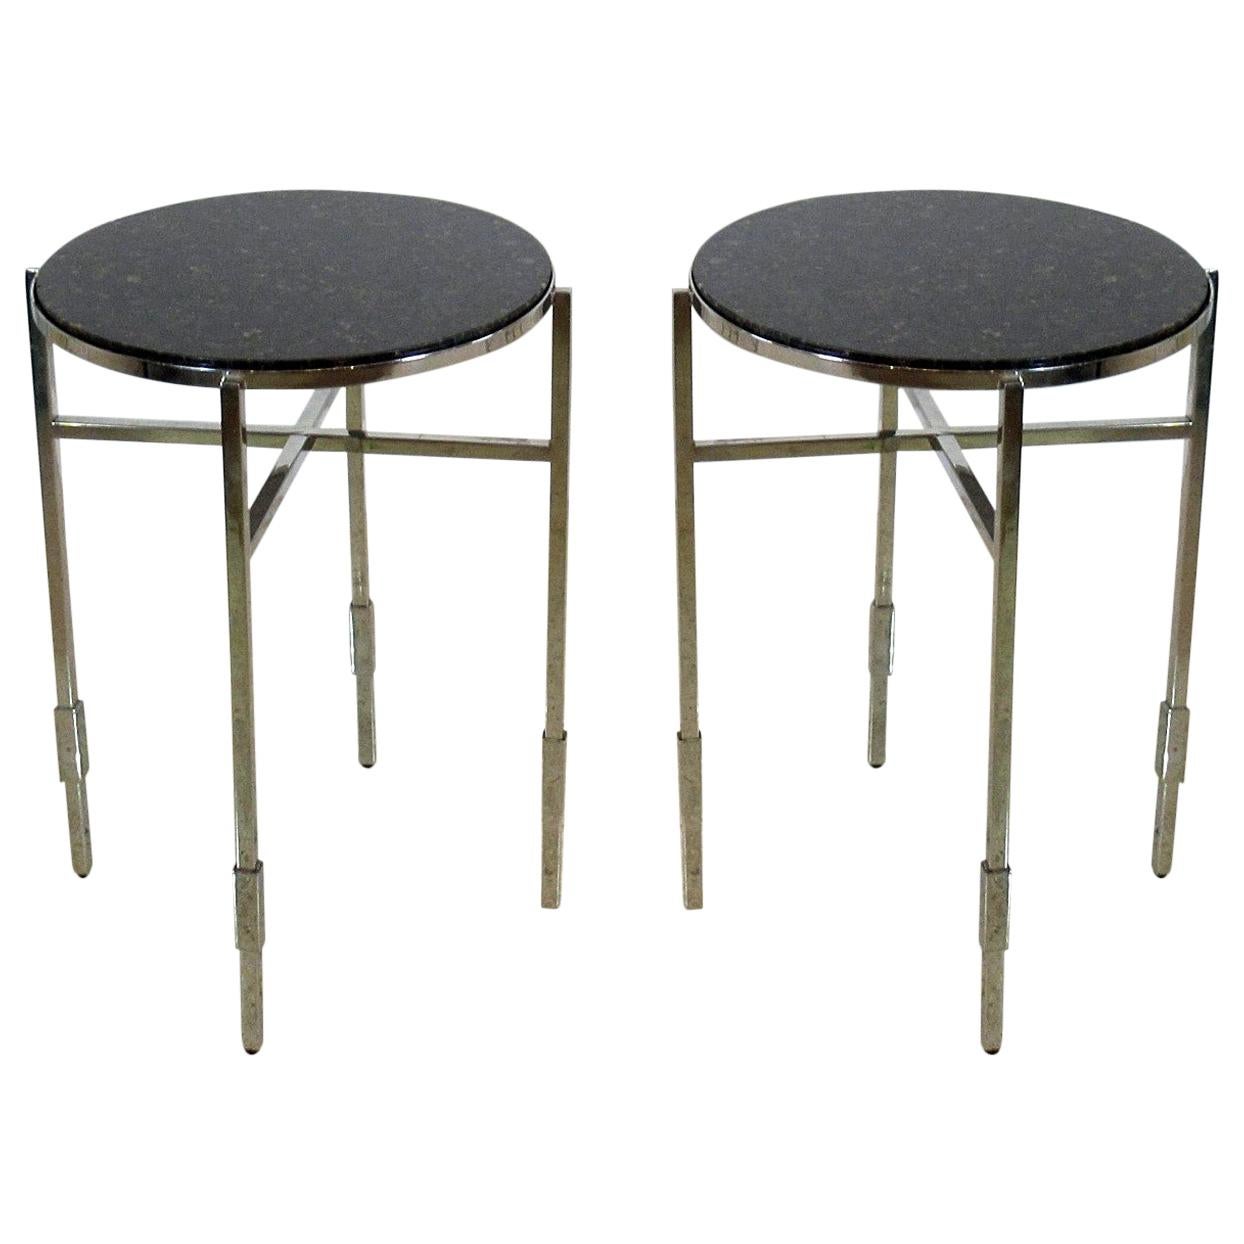 American Modern Polished Chrome & Granite Occasional Tables, Michael Graves For Sale